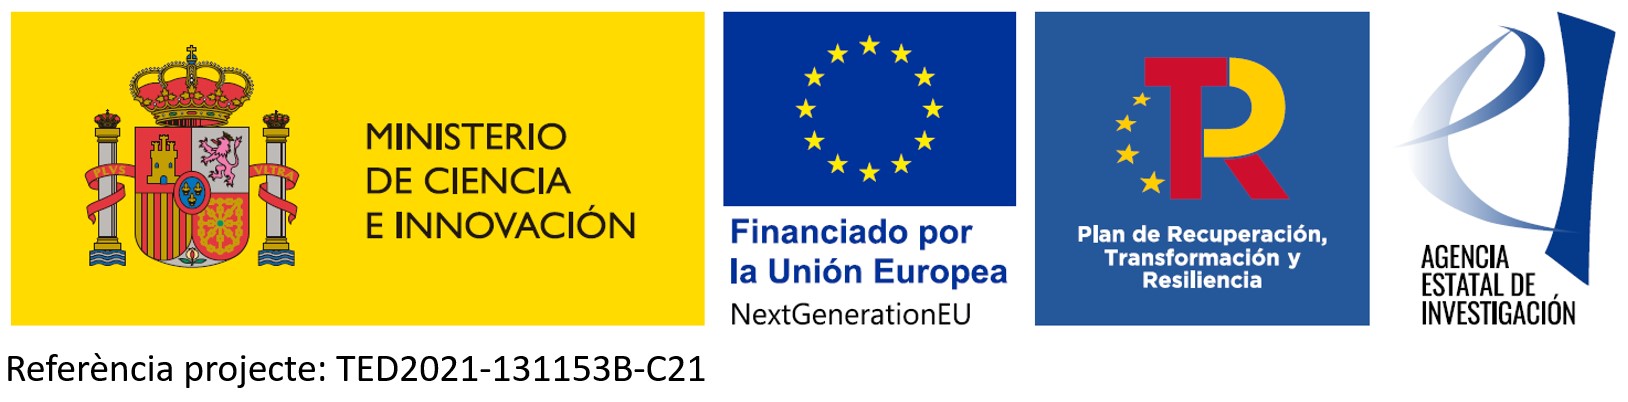 Spanish Ministry of Science and Innovation, Funded by the European Union Next Generation EU Plan for Recovery, Transformation and Resilience, National Research Agency Ref. project: TED2021-131153B-C21